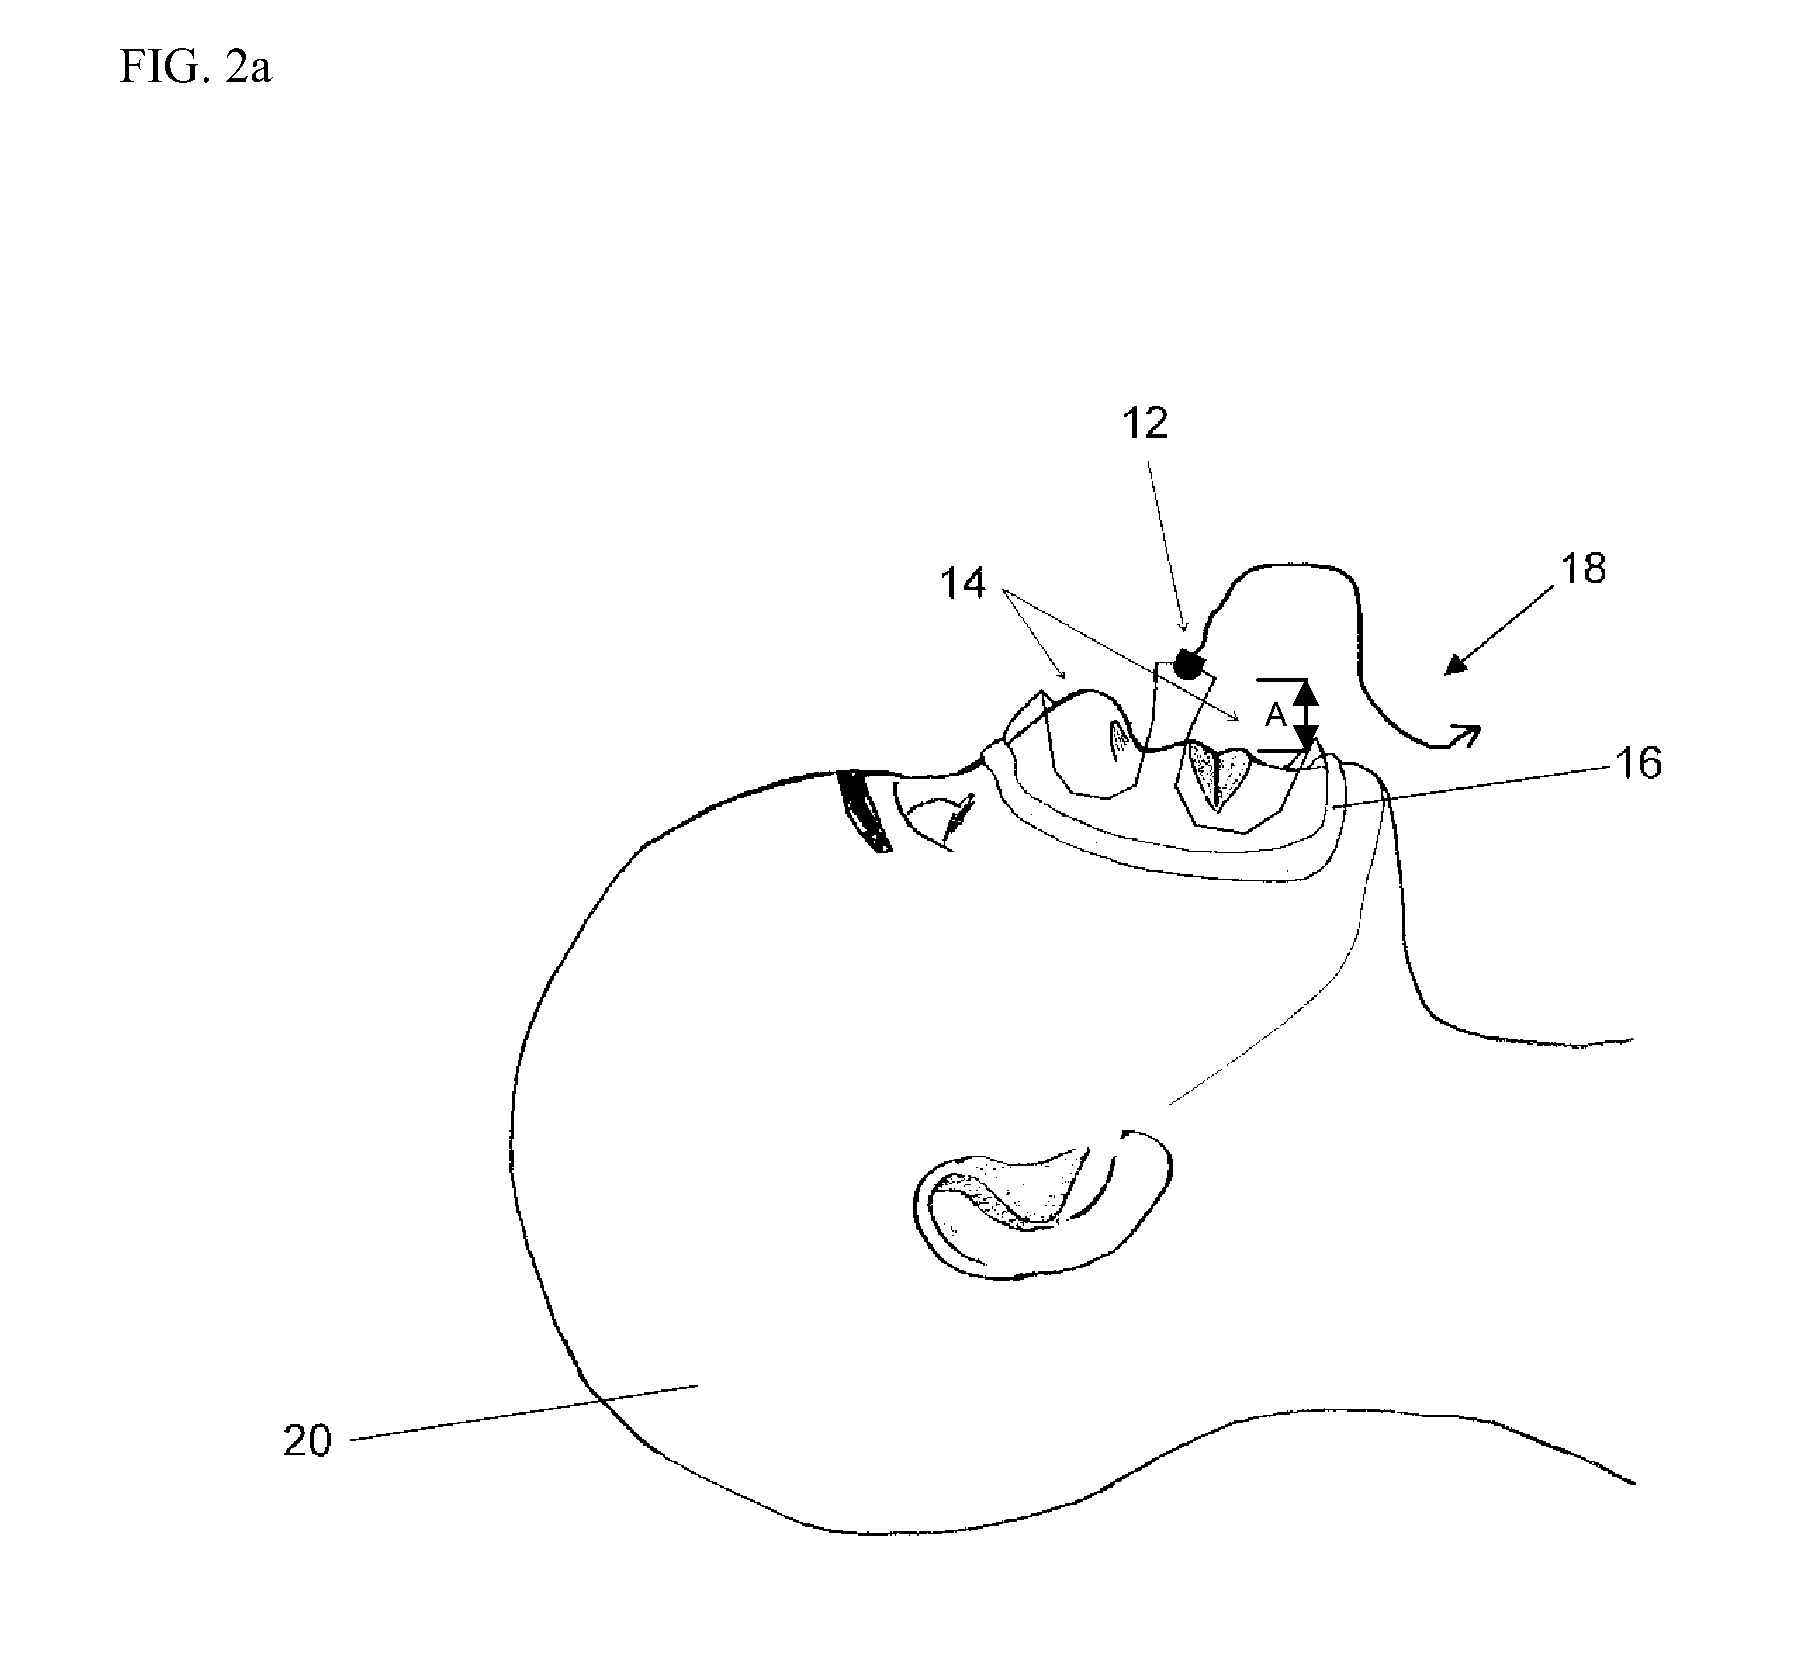 Mask and method for use in respiratory monitoring and diagnostics